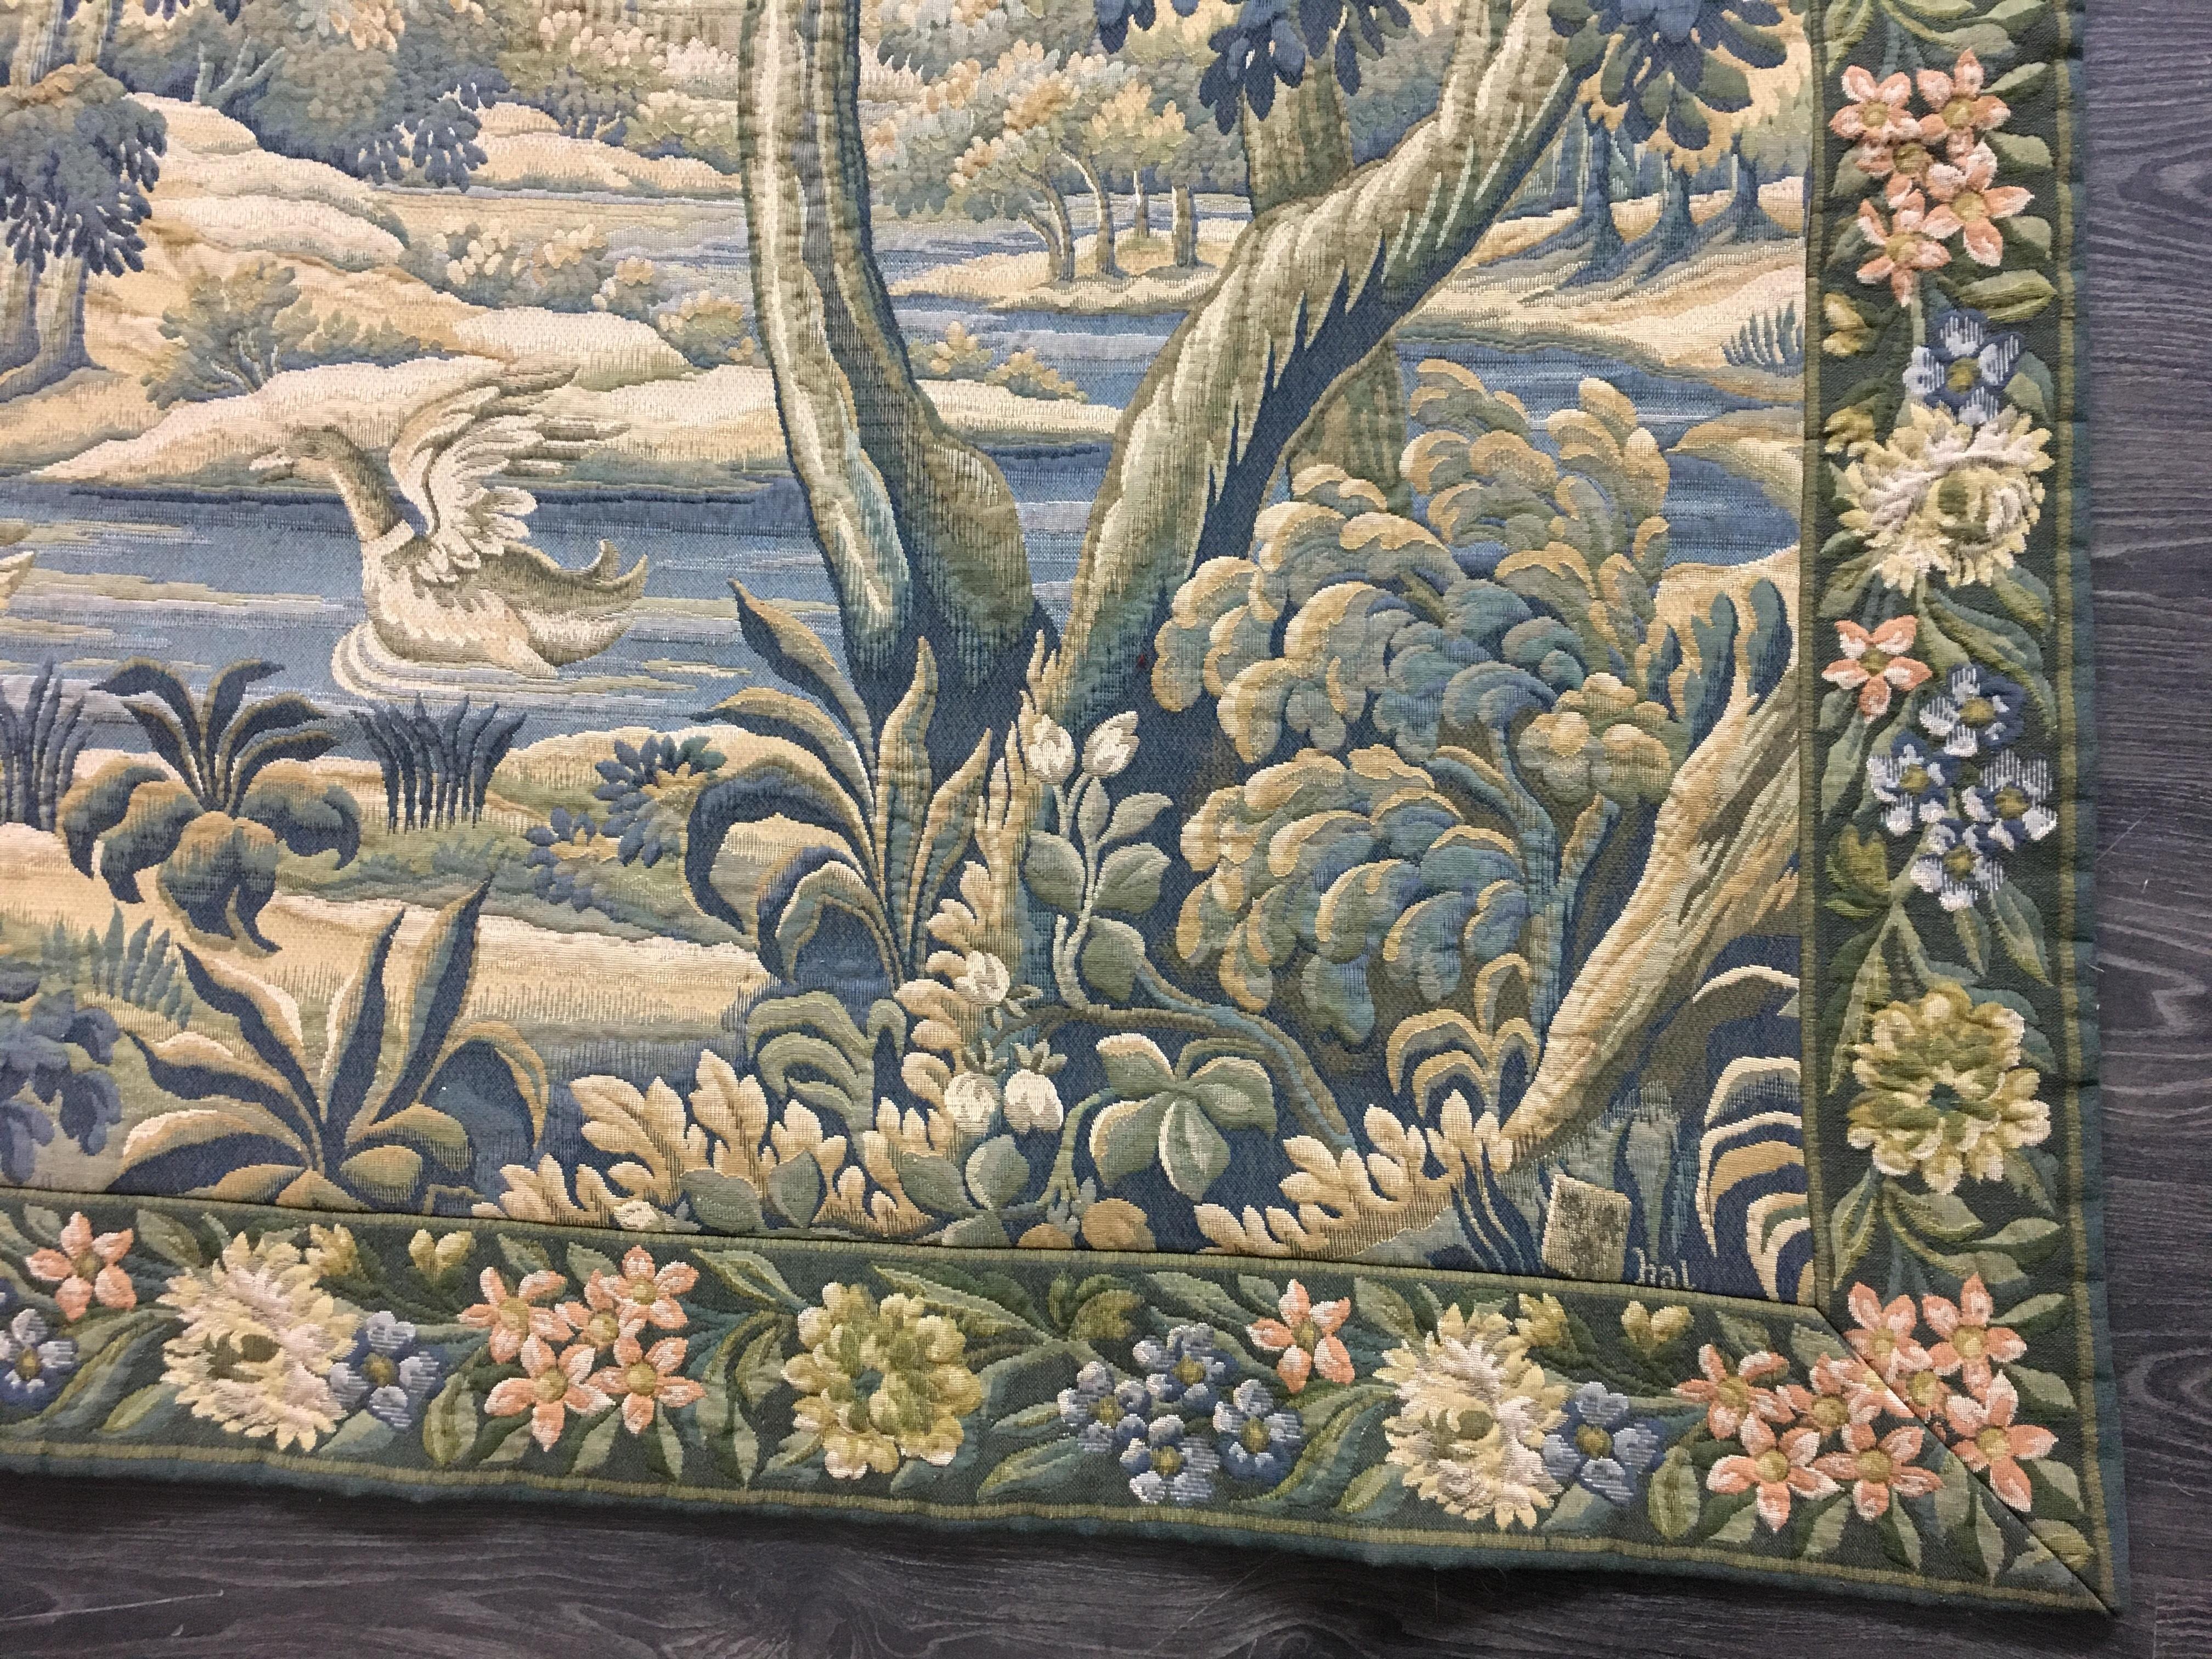 French Aubusson Style Verdure Tapestry with Rivers, Ducks, and Foliage 4